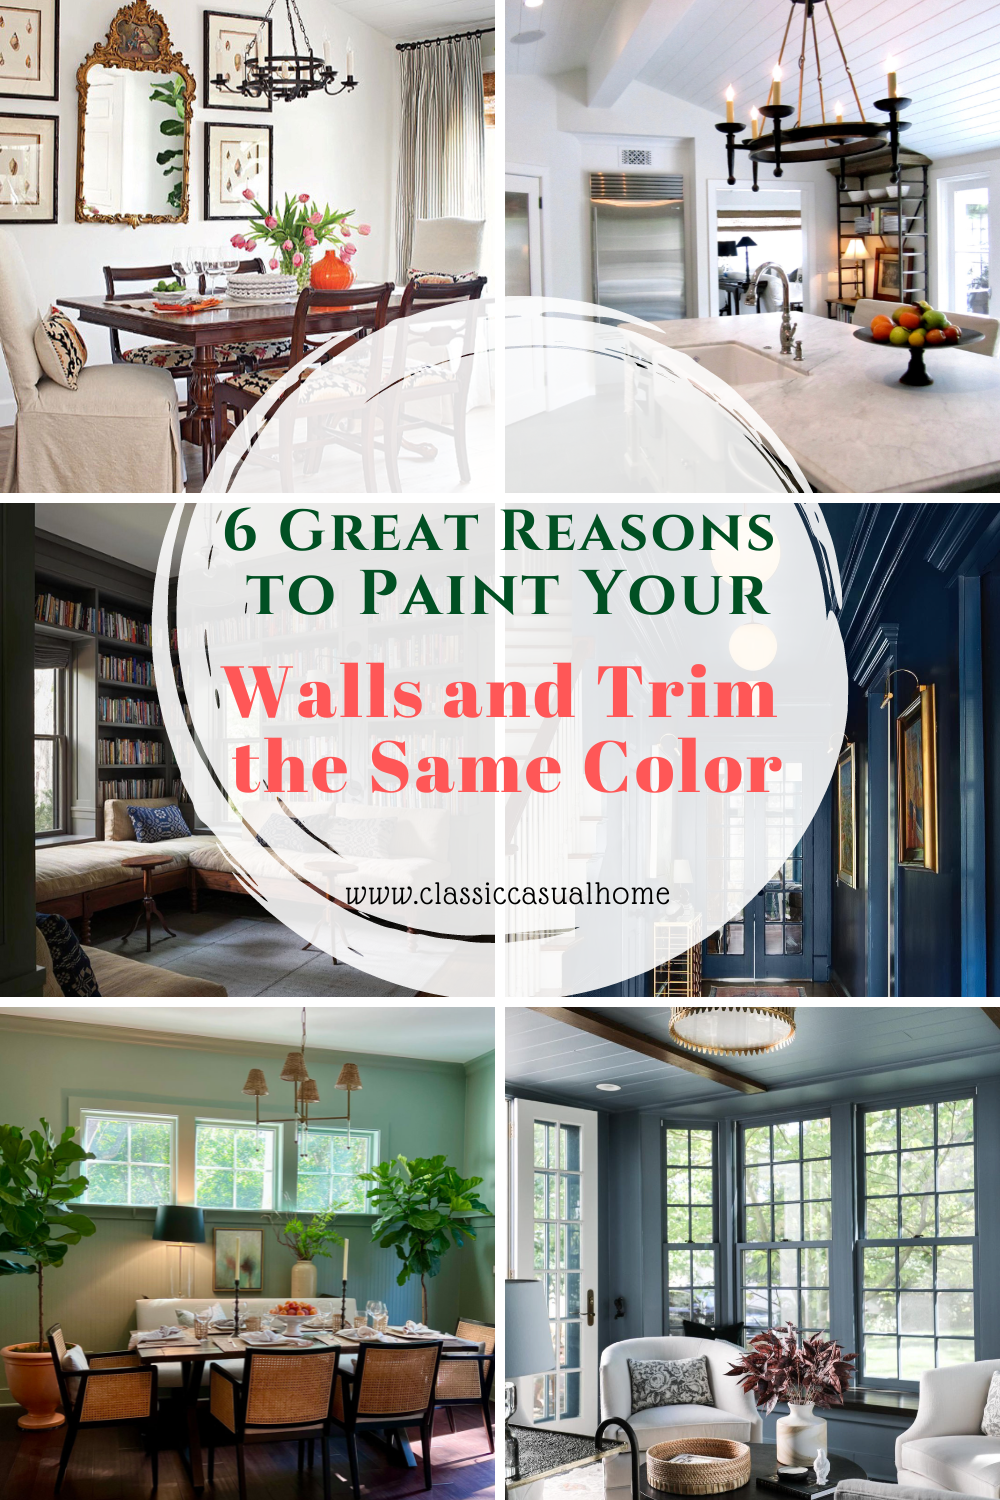 Great examples of painting the walls and trim the same color